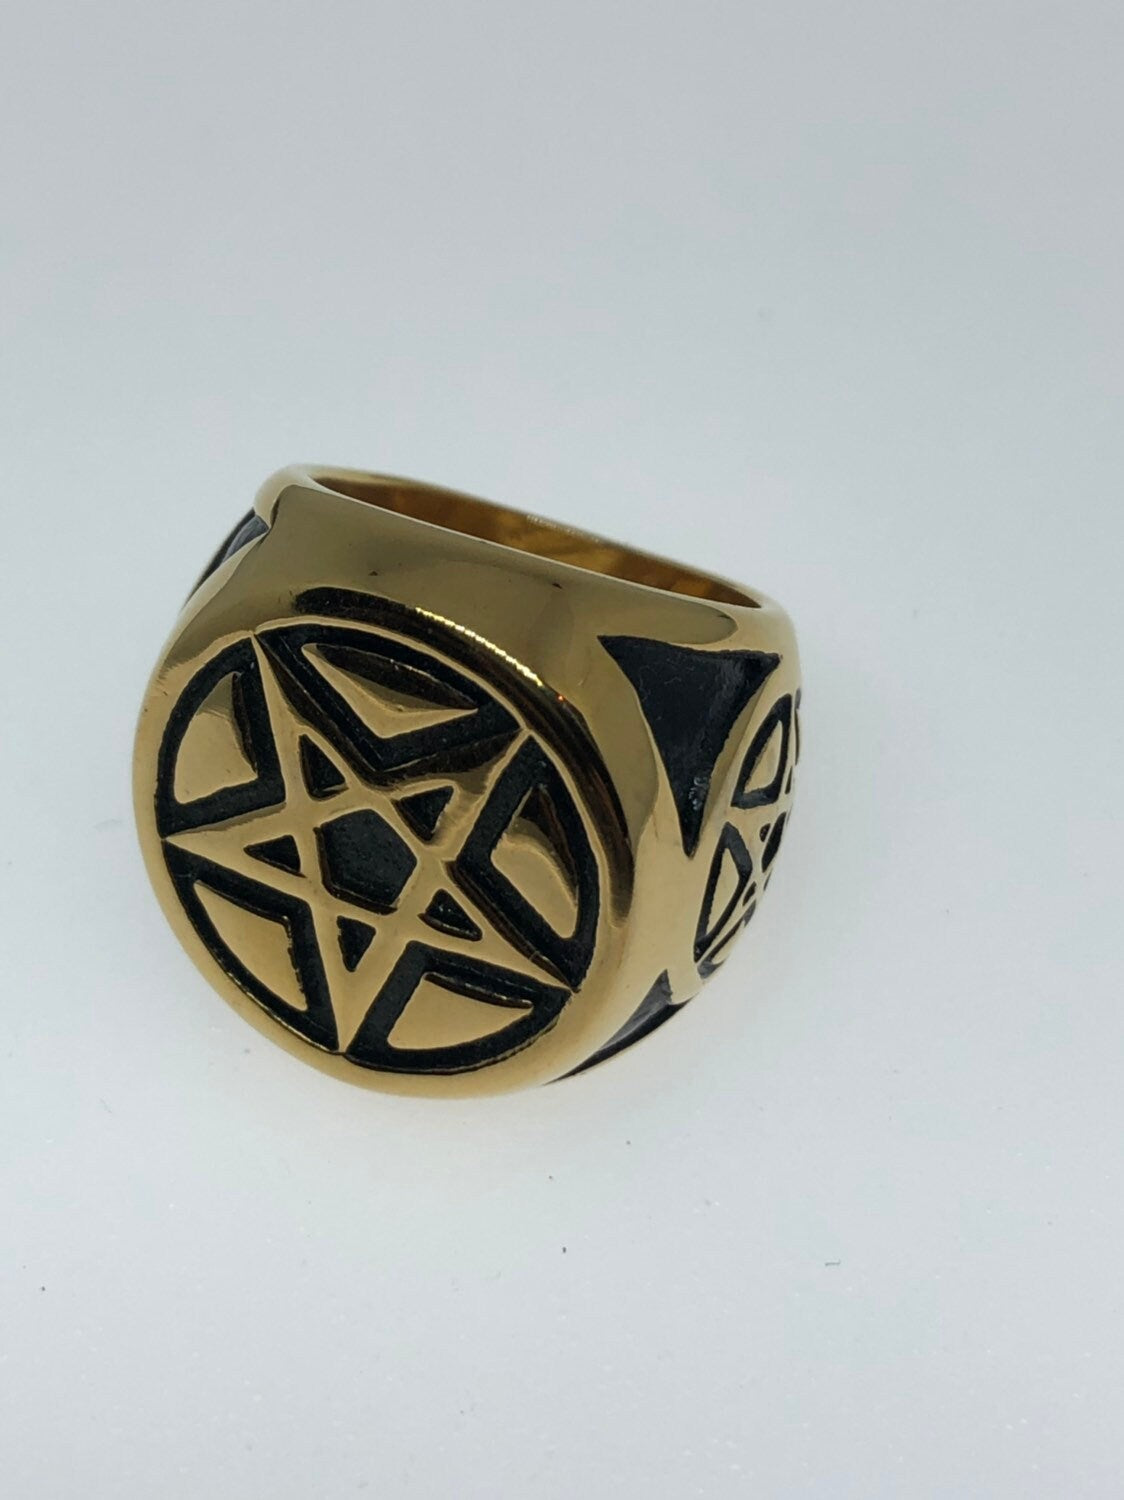 Vintage Gothic Golden Stainless Steel Pentacle Star Mens Ring